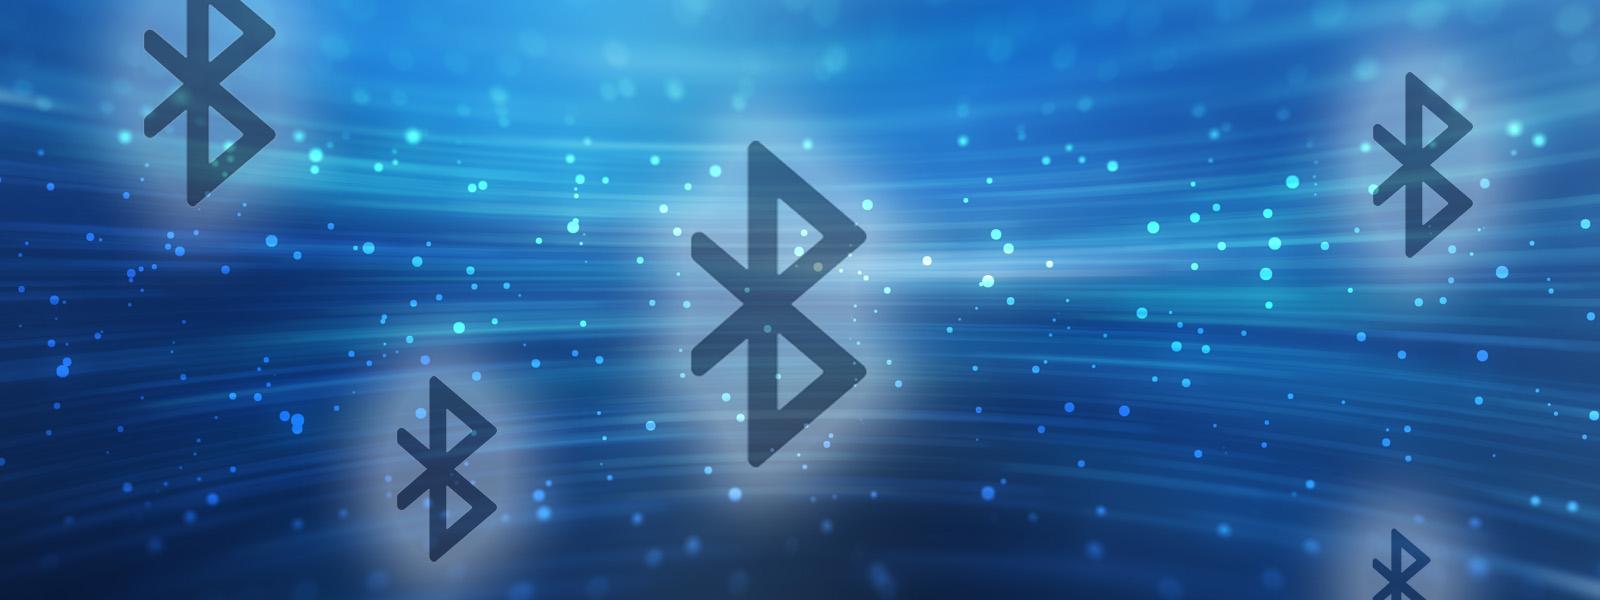 Bluetooth Low Energy (BLE) symbol on blue background